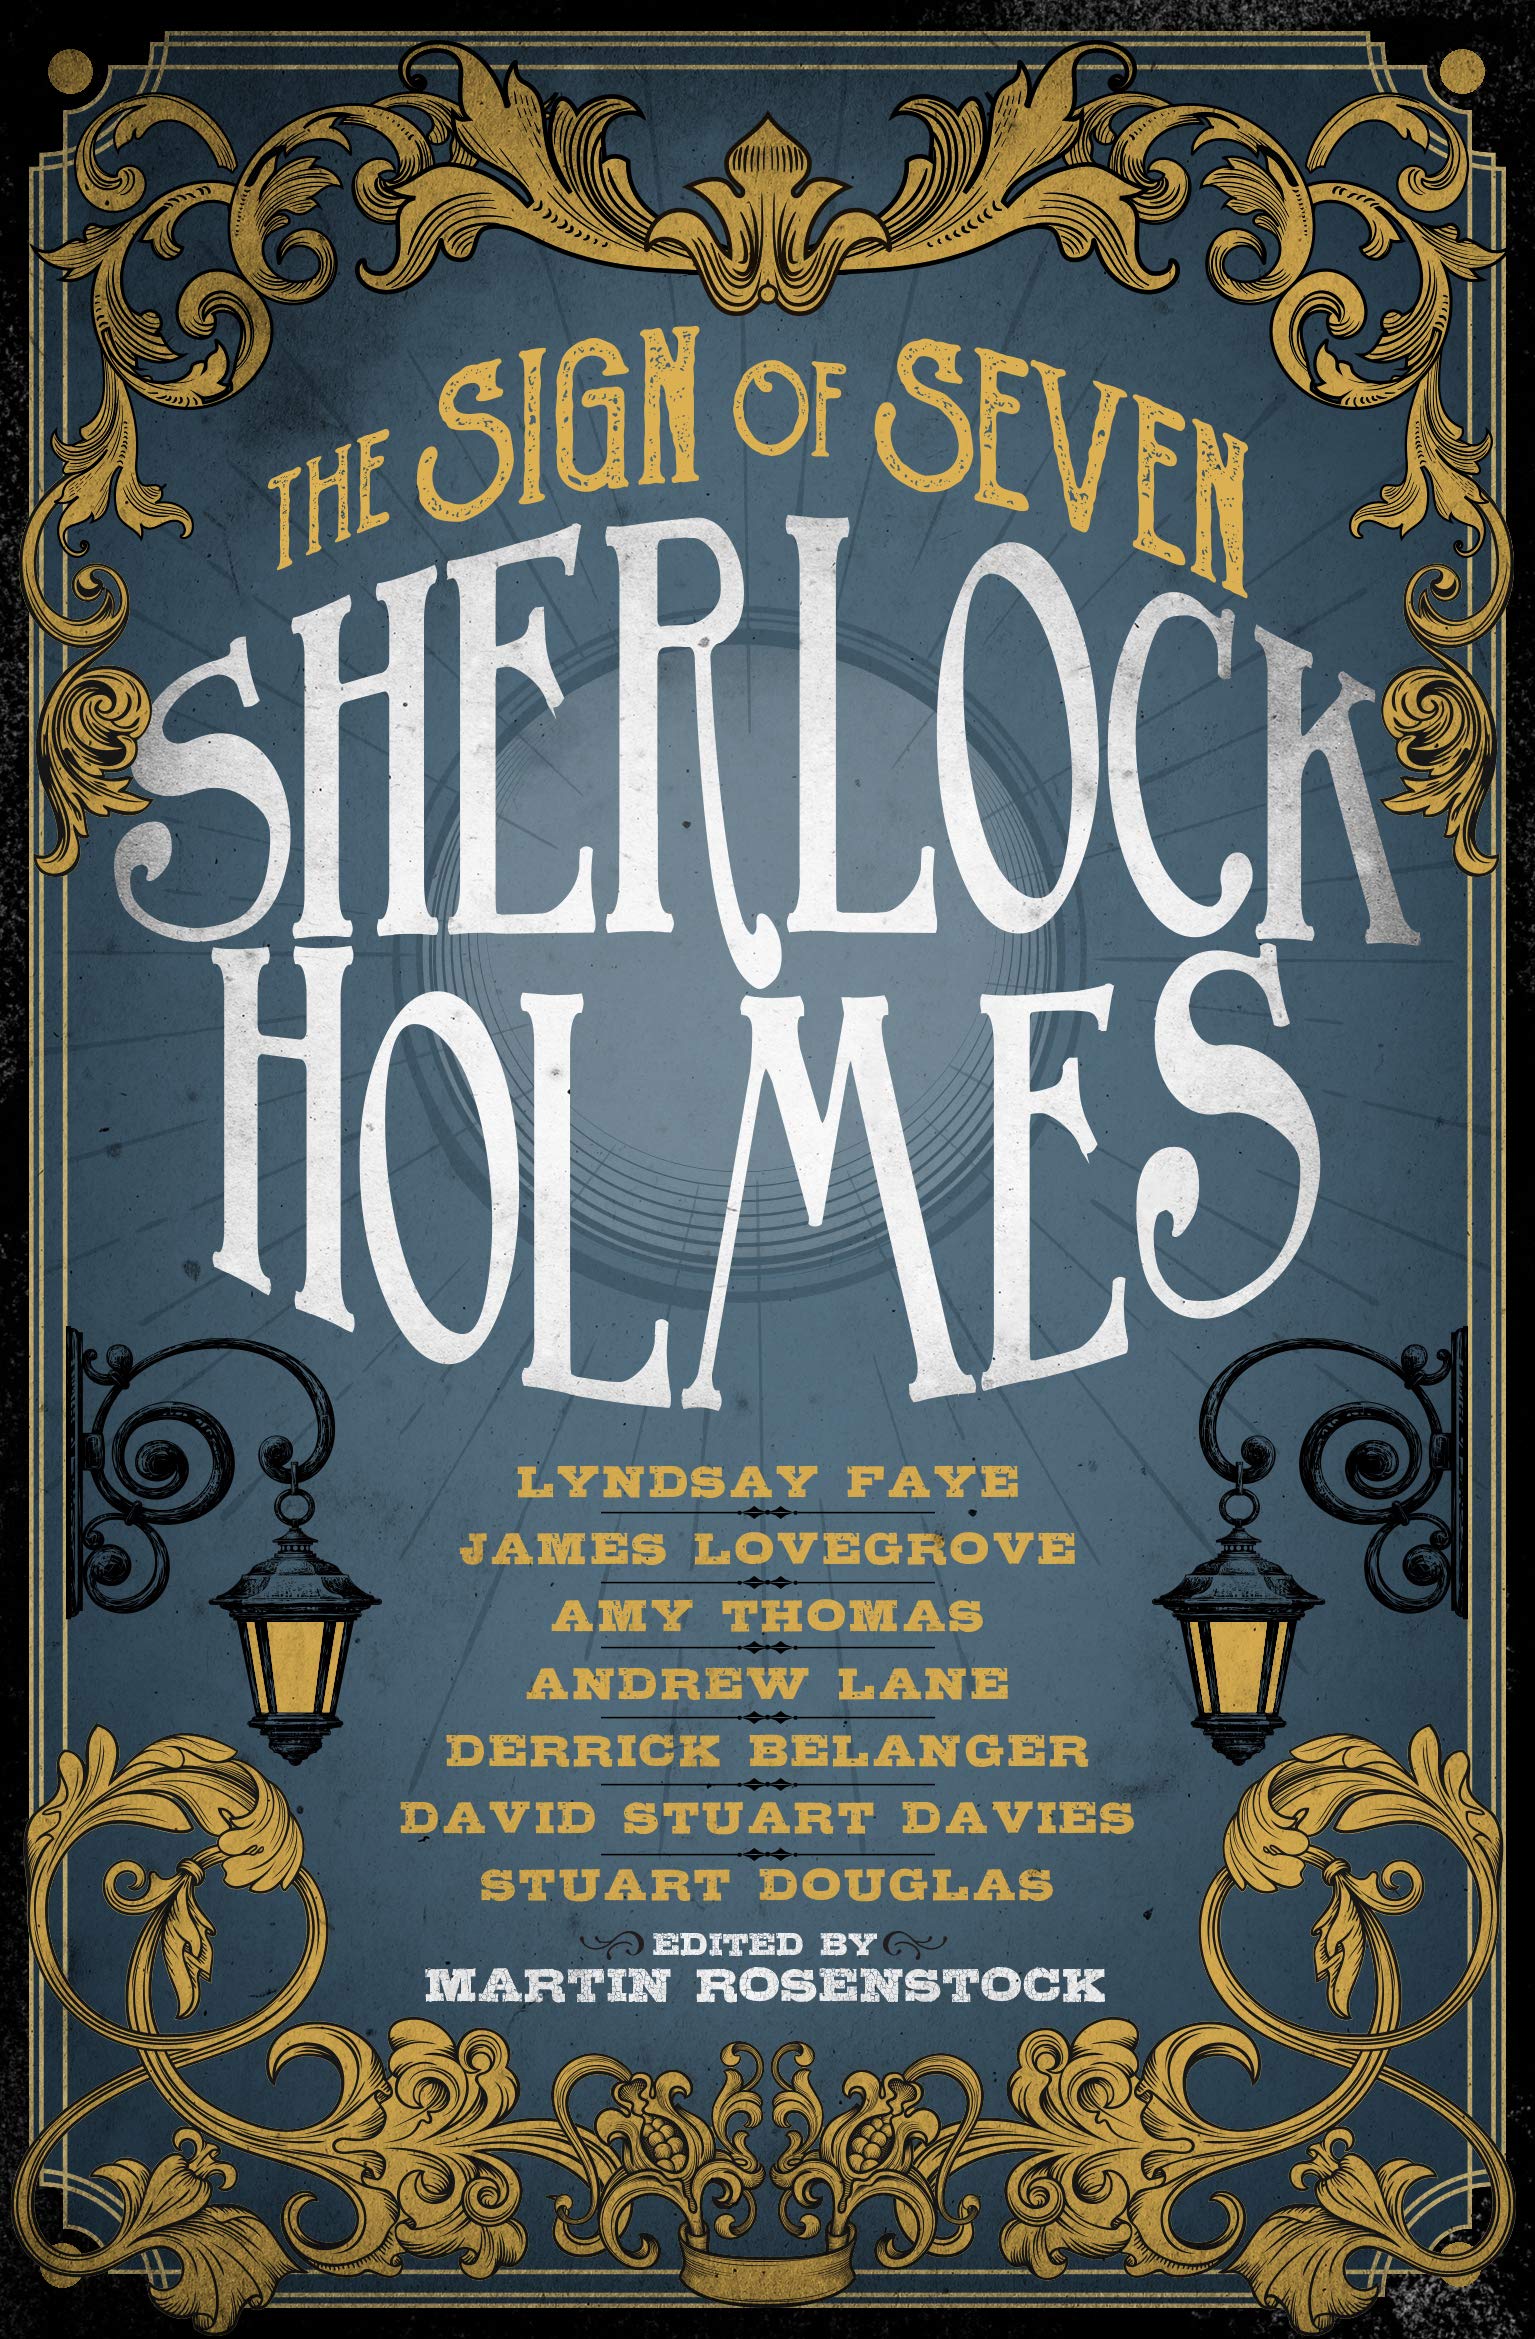 The Sign Of Seven - Sherlock Holmes